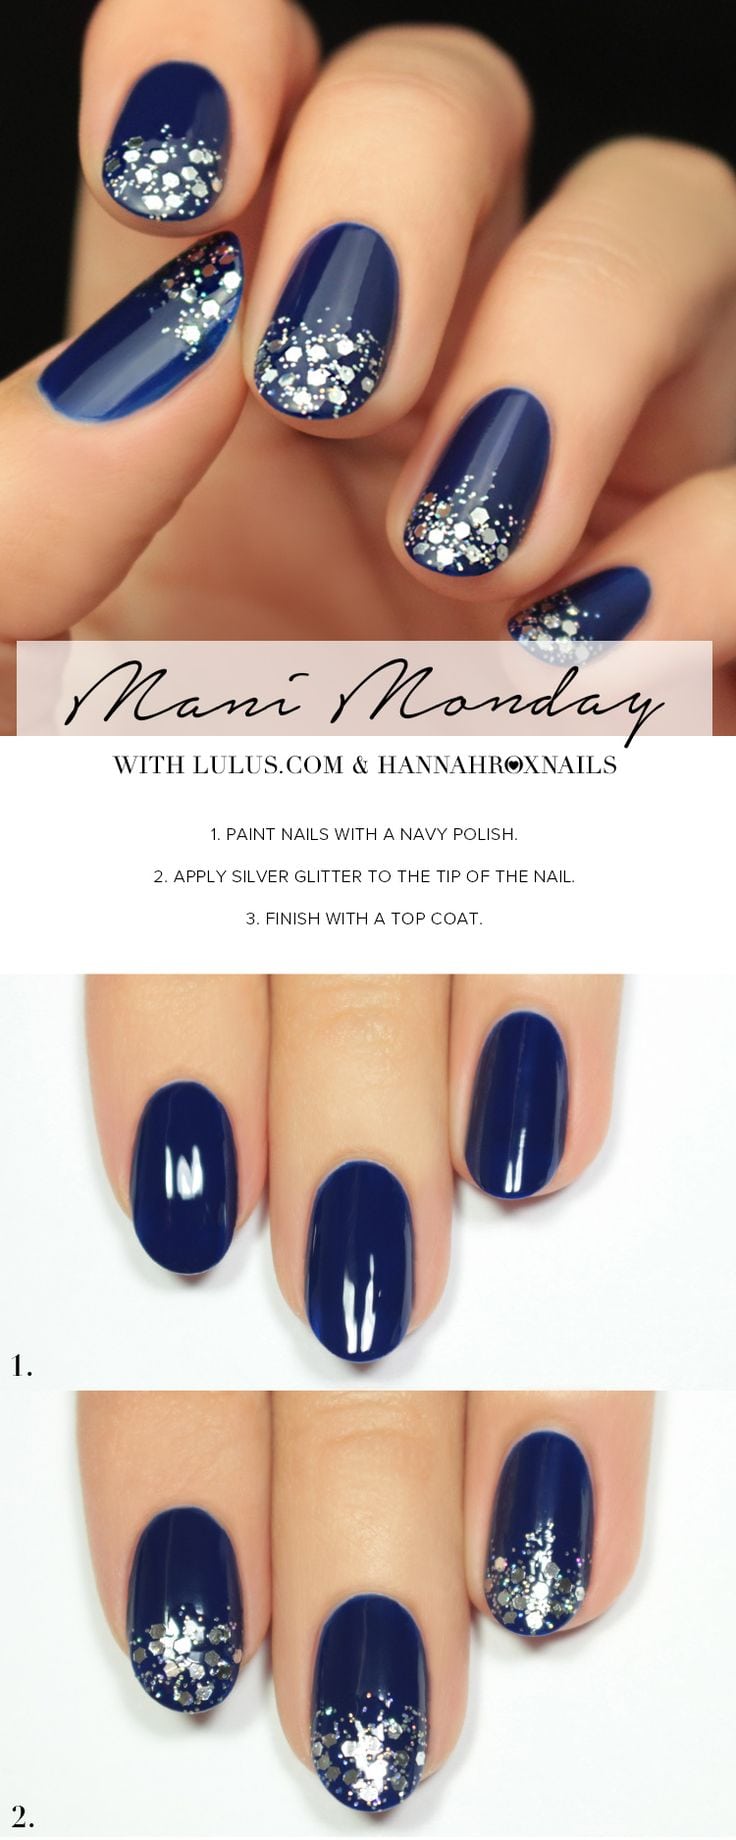 [ad_1]

Mani Monday: Navy Blue and Silver Glitter Nail Tutorial | Lulus.com Fashion Blog | Bloglovin’
Source by linlin807
[ad_2]
			
			…